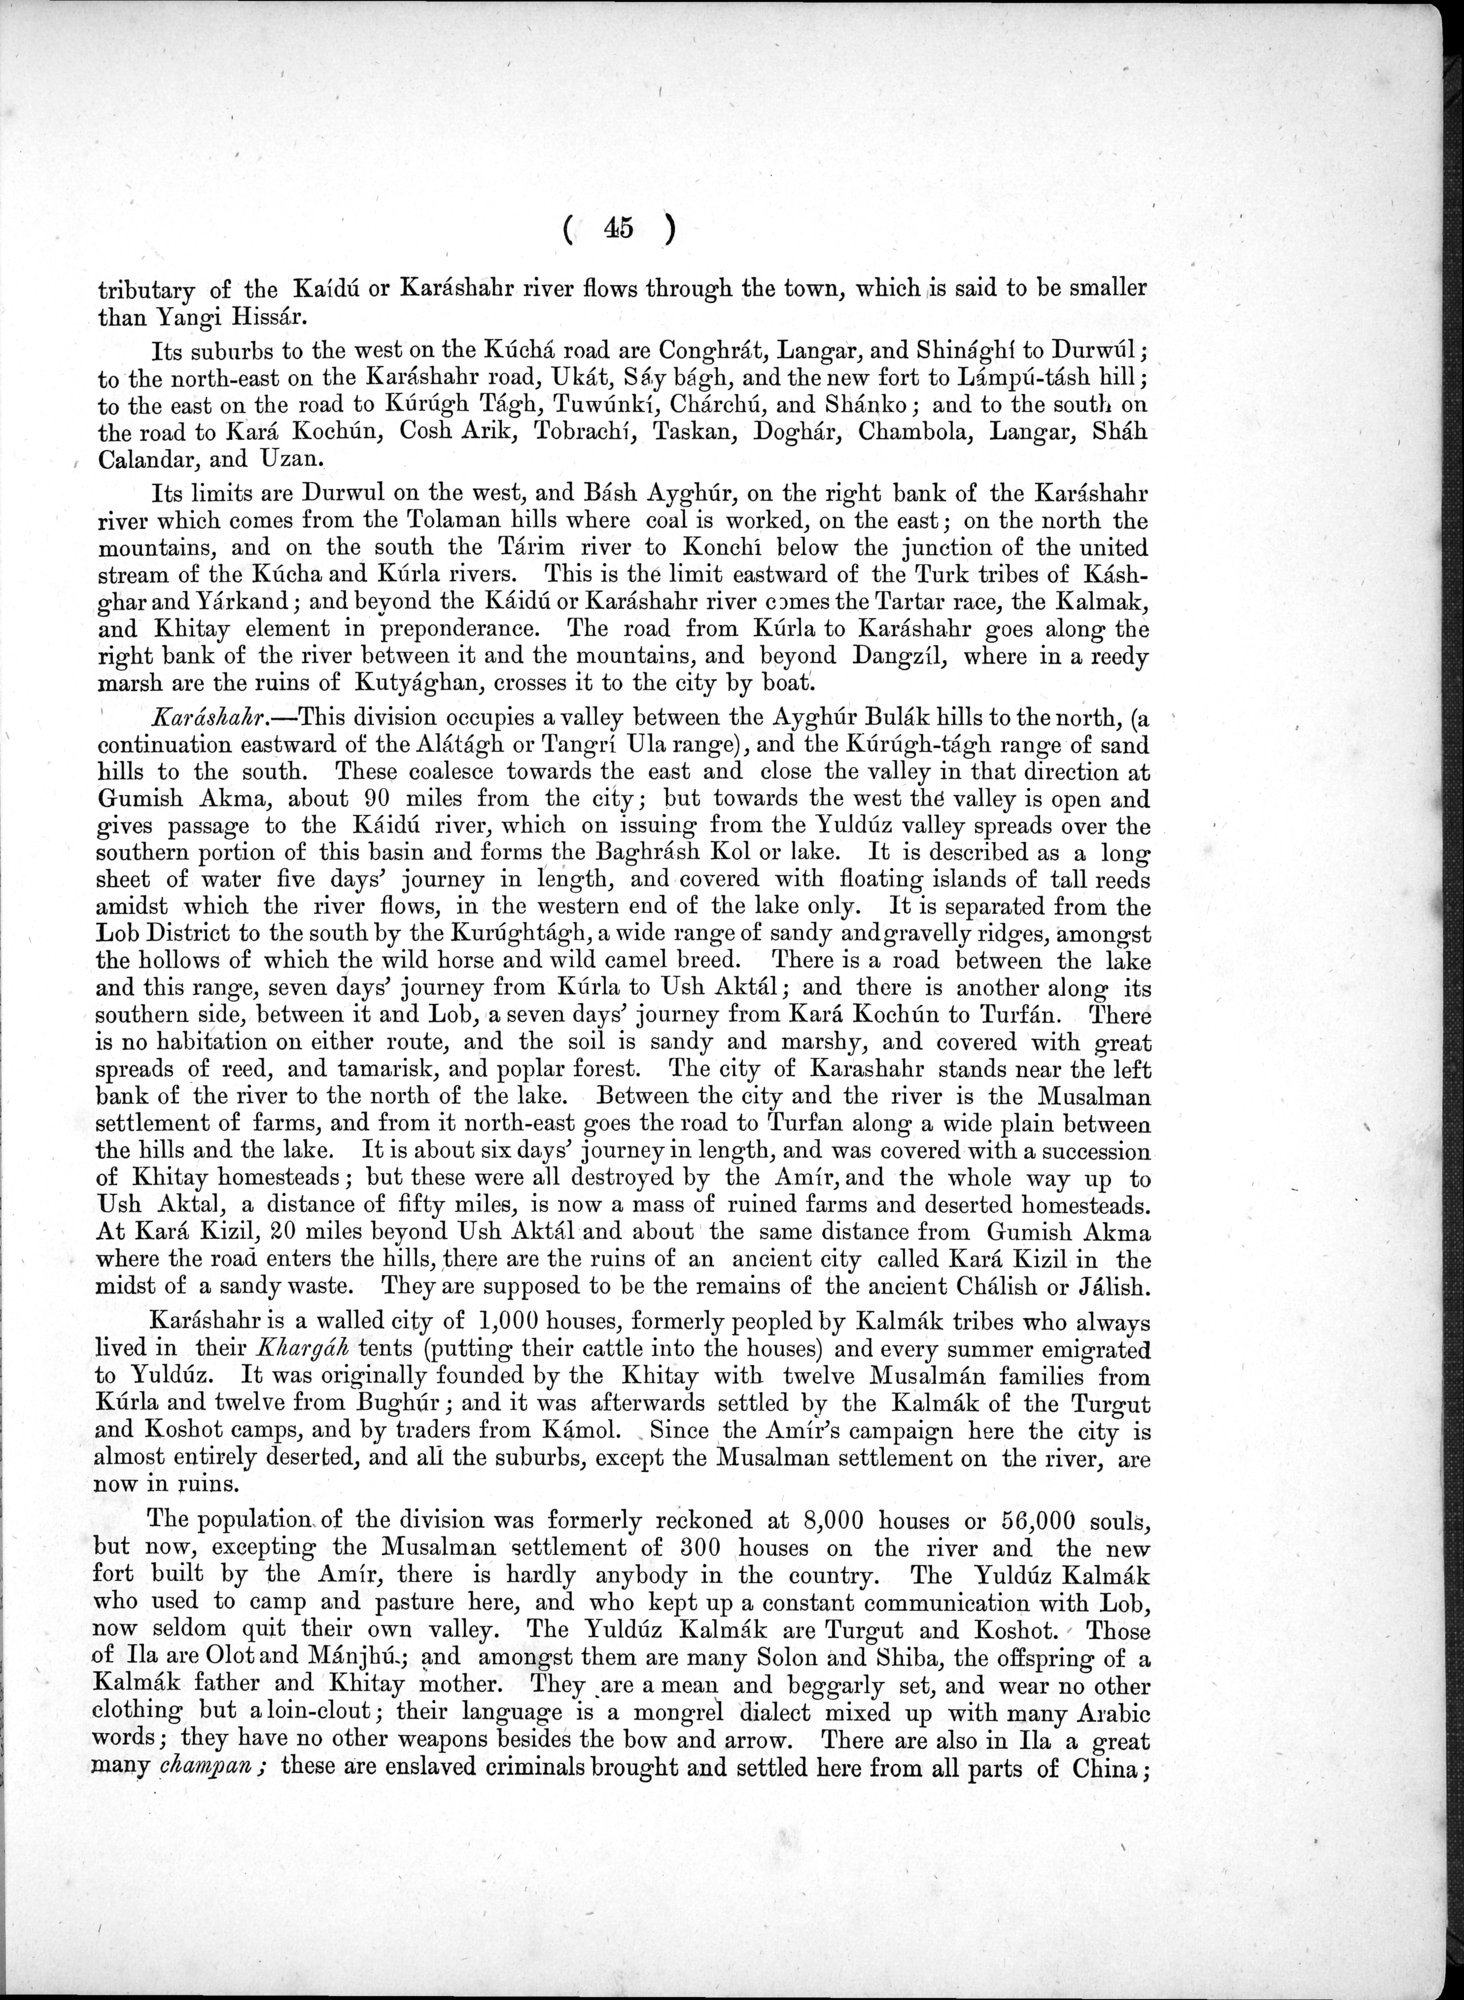 Report of a Mission to Yarkund in 1873 : vol.1 / Page 81 (Grayscale High Resolution Image)